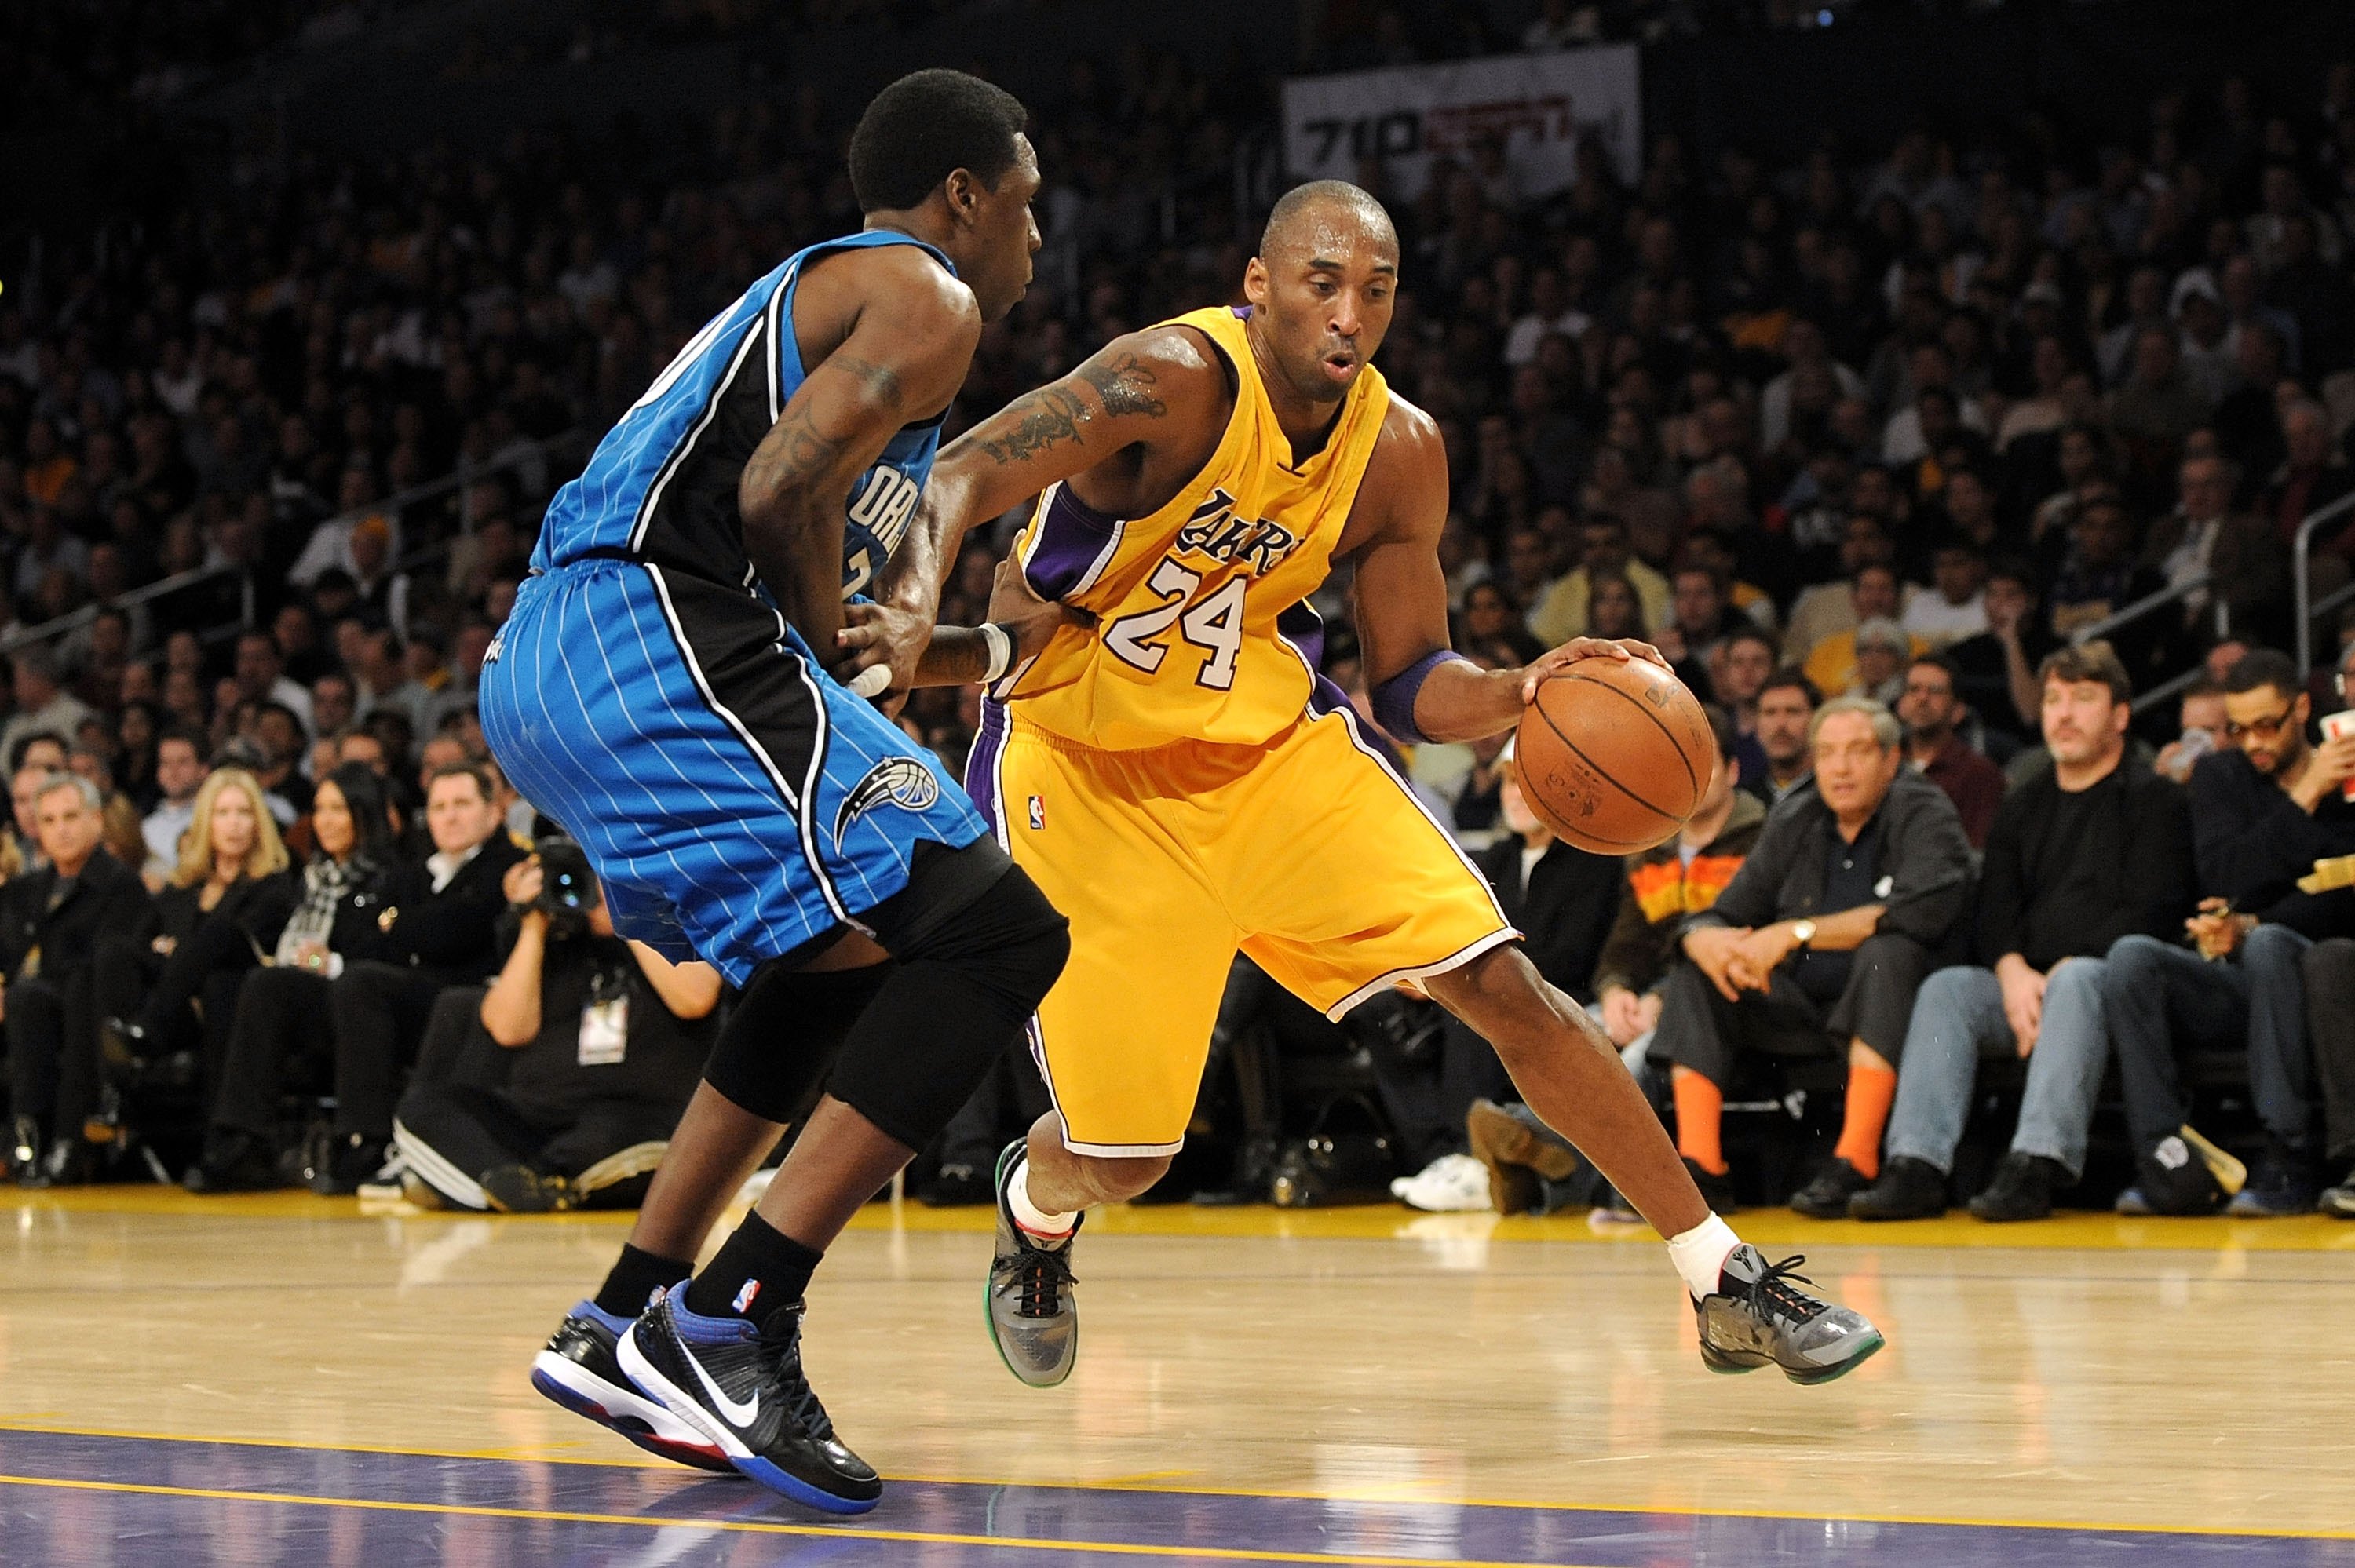 LOS ANGELES, CA - JANUARY 18:  Kobe Bryant #24 of the Los Angeles Lakers drives against Mickael Pietrus #20 of the Orlando Magic during the game on January 18, 2010 at Staples Center in Los Angeles, California.  The Lakers won 98-92.  NOTE TO USER: User e